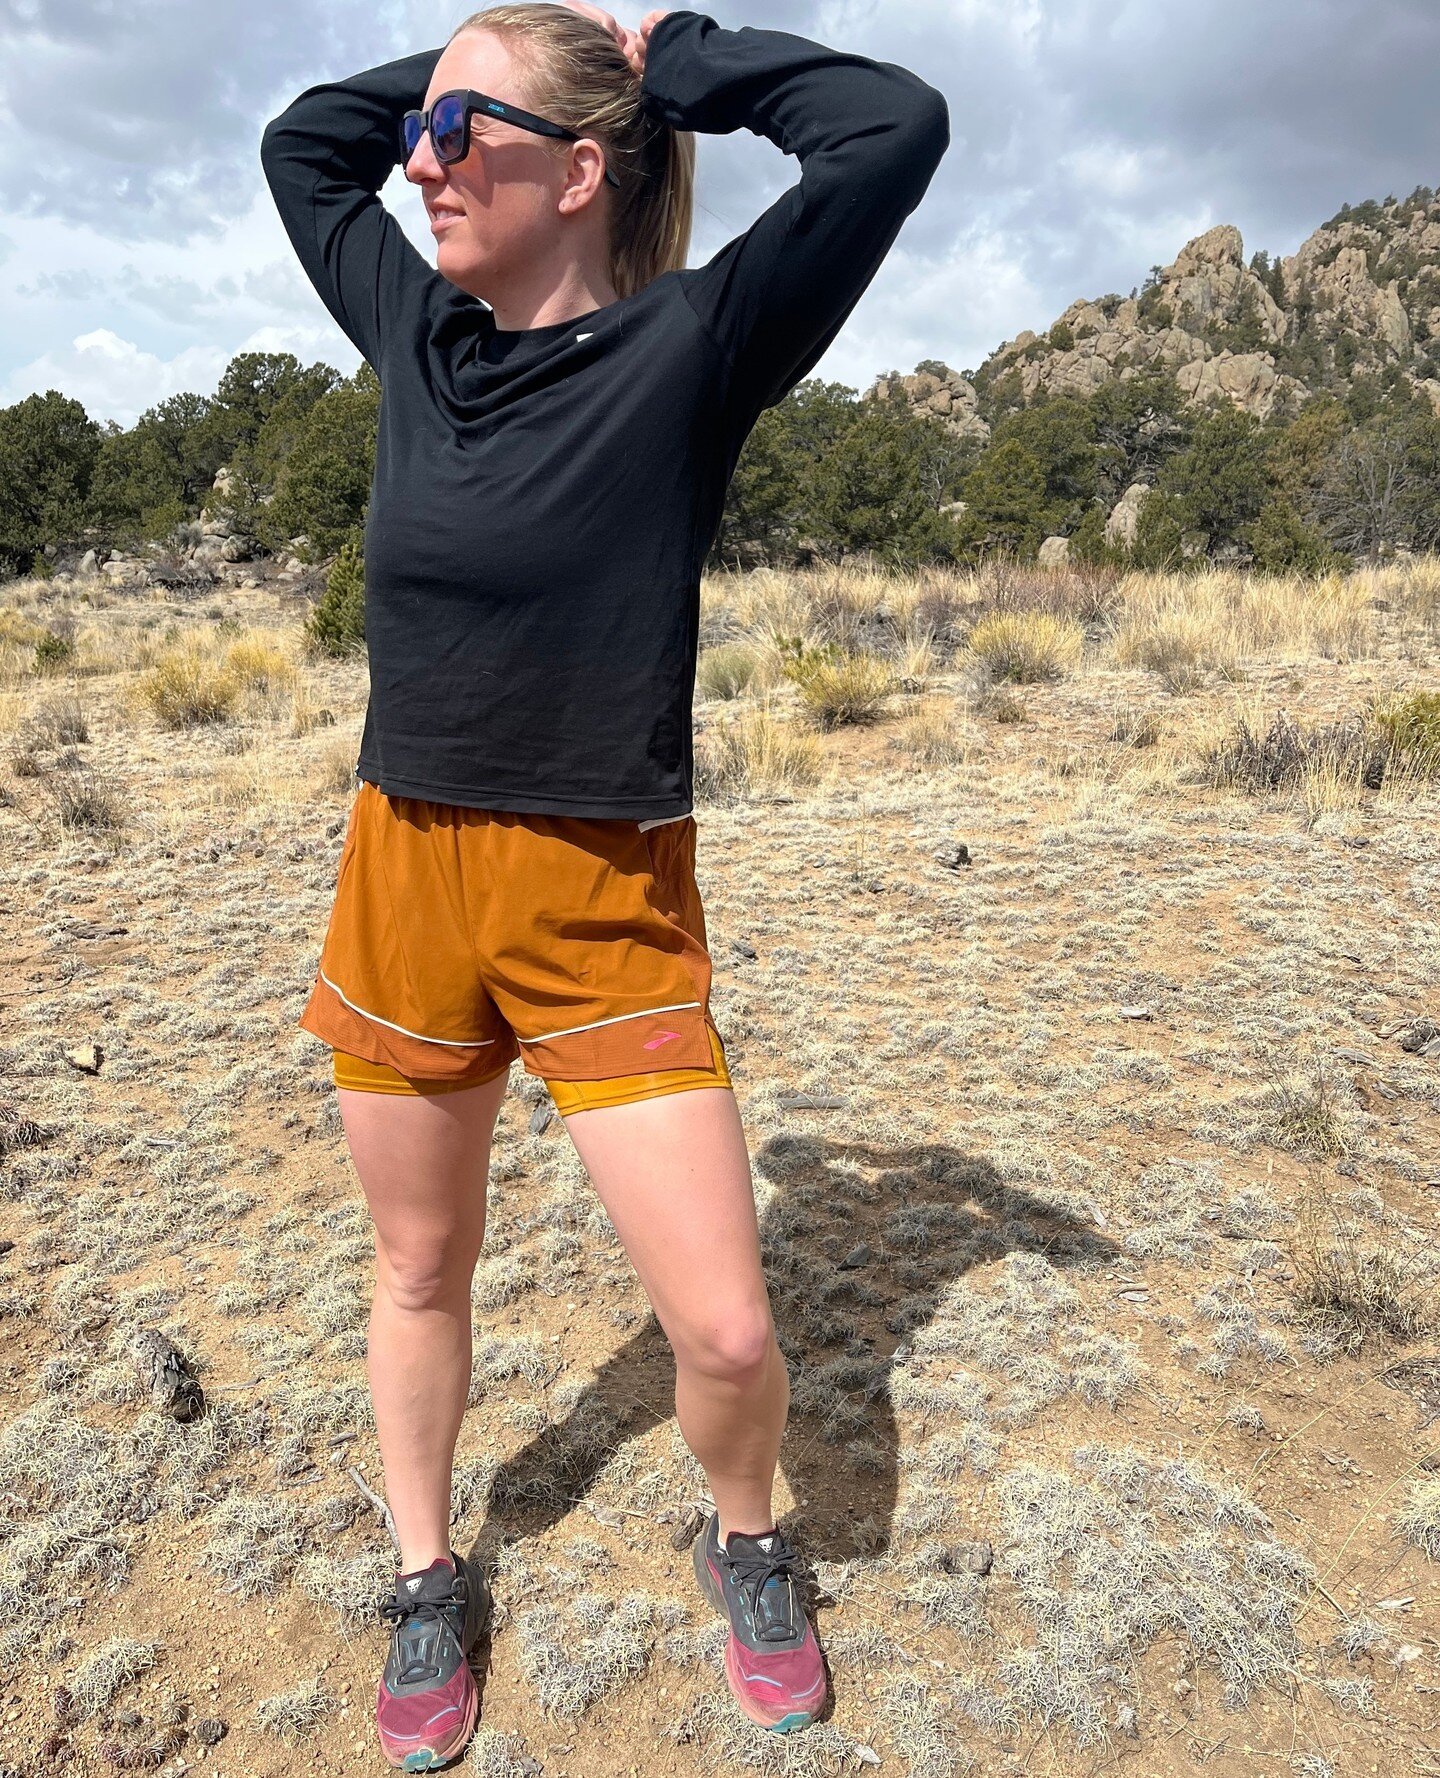 We've tested nearly two dozen pairs of women's running shorts over 4 years of year-round trail running. ⁠
⁠
Our goal over thousands of miles of running is to find the best of 2023 (we also have a men's trail running shorts guide!)⁠
⁠
That's right--th